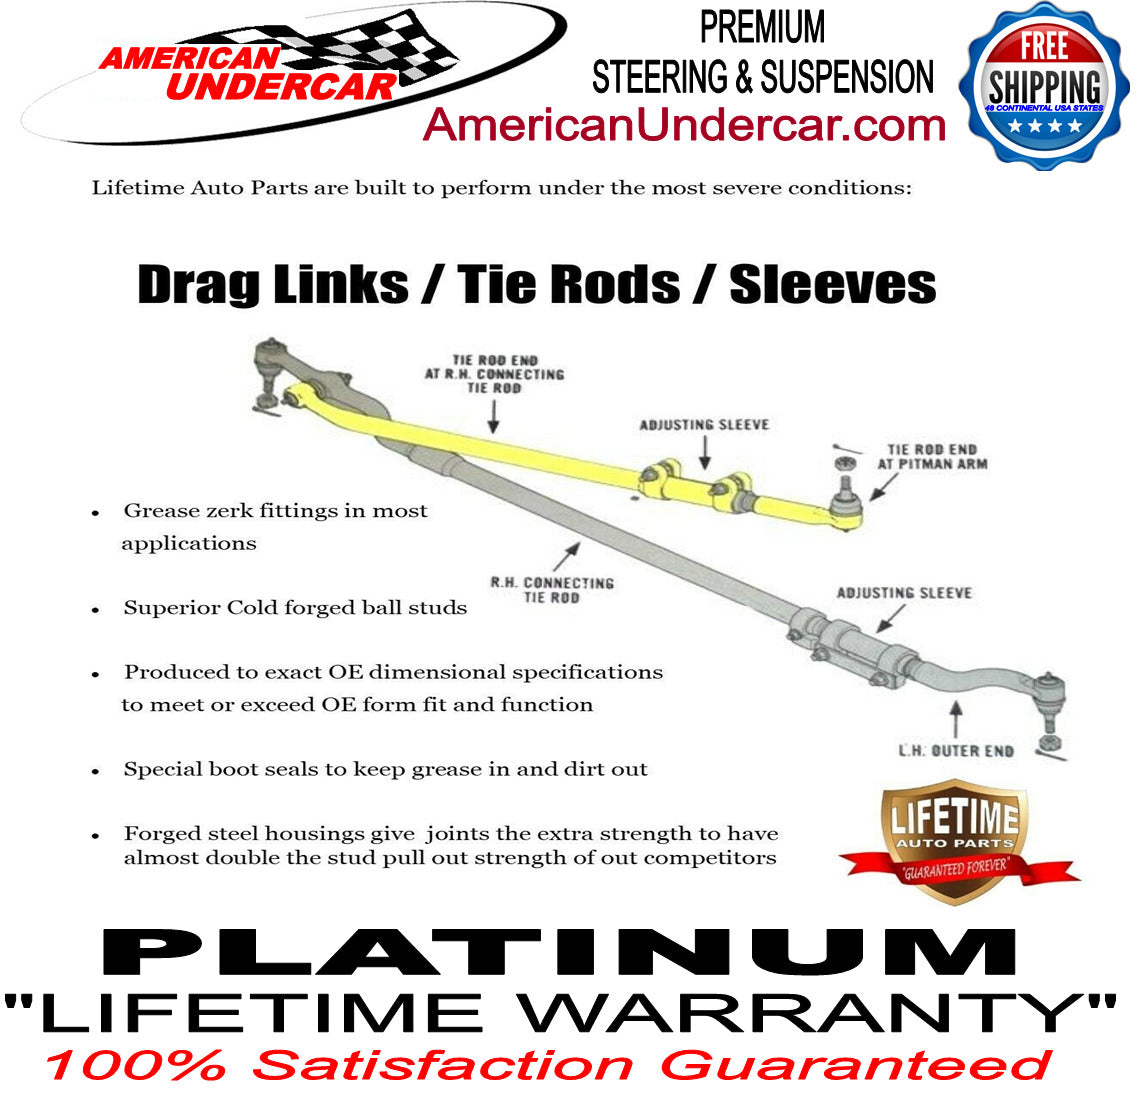 Lifetime Chevy GMC 2500HD 3500HD 01-10 Ball Joints Control Arms and Bushings Kit